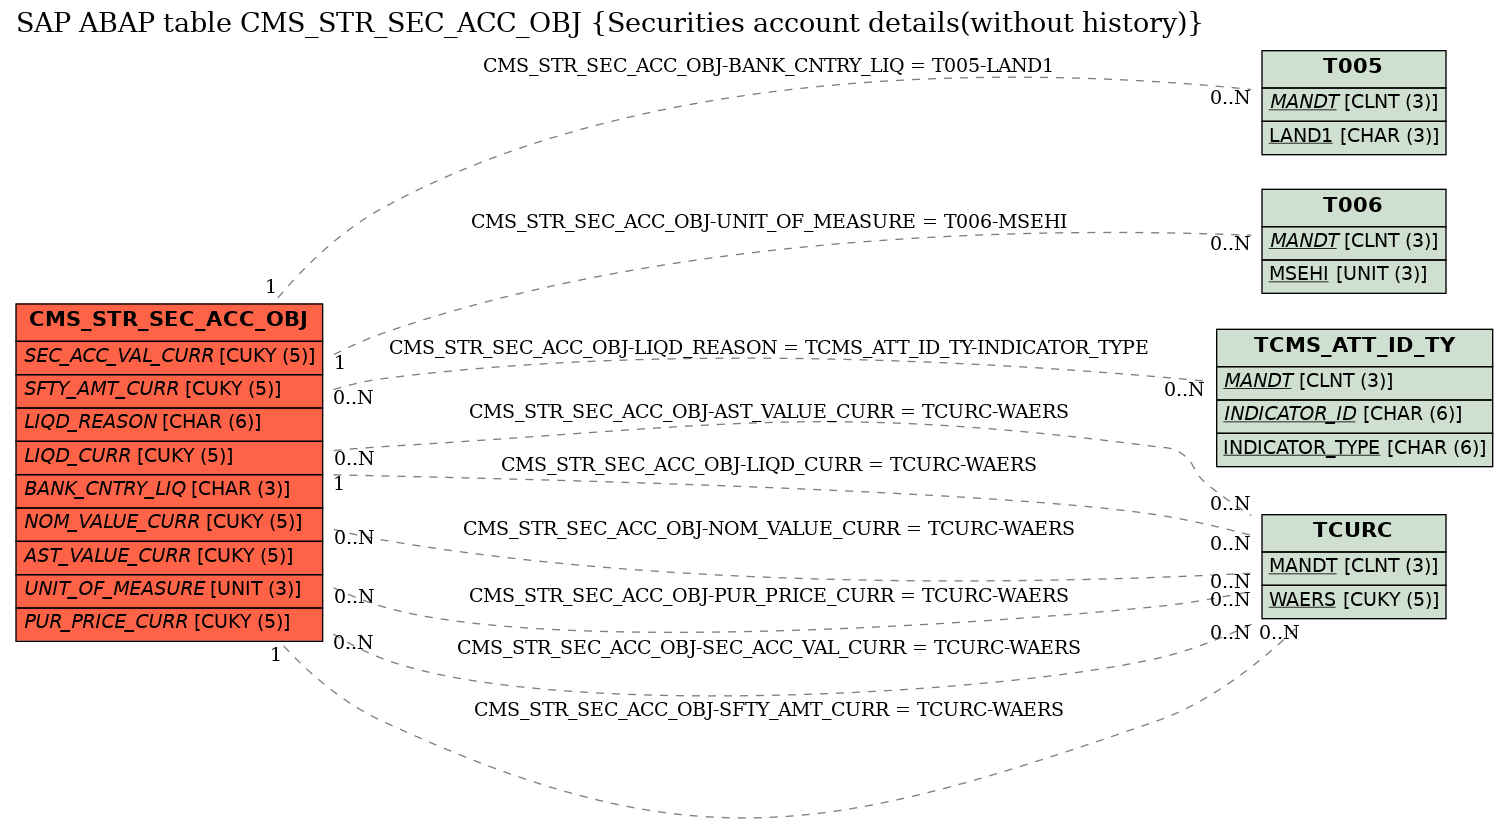 E-R Diagram for table CMS_STR_SEC_ACC_OBJ (Securities account details(without history))